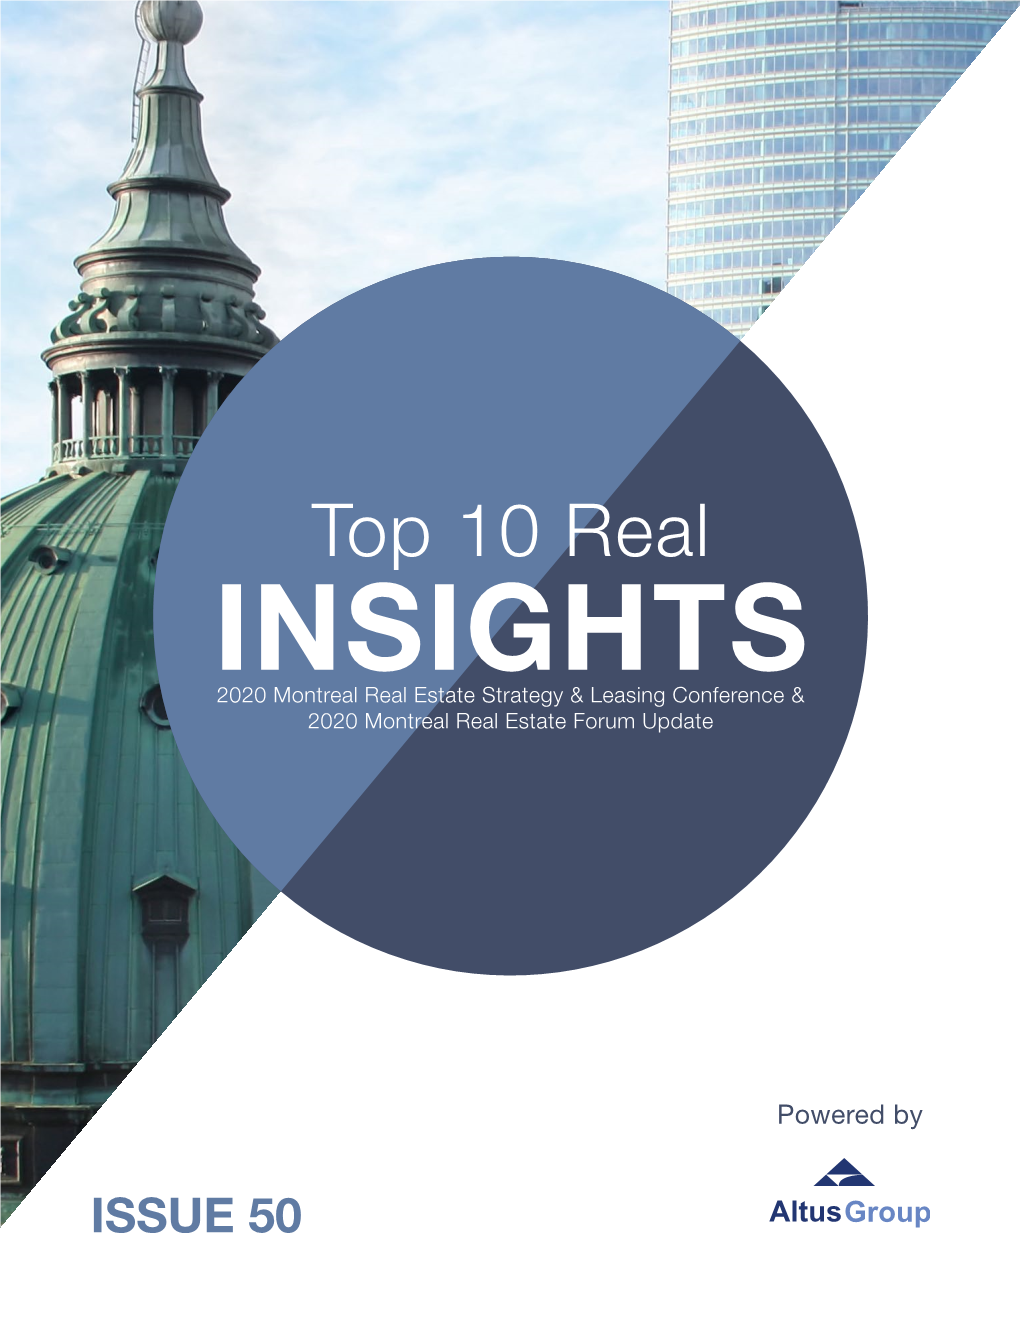 Top 10 Real INSIGHTS 2020 Montreal Real Estate Strategy & Leasing Conference & 2020 Montreal Real Estate Forum Update